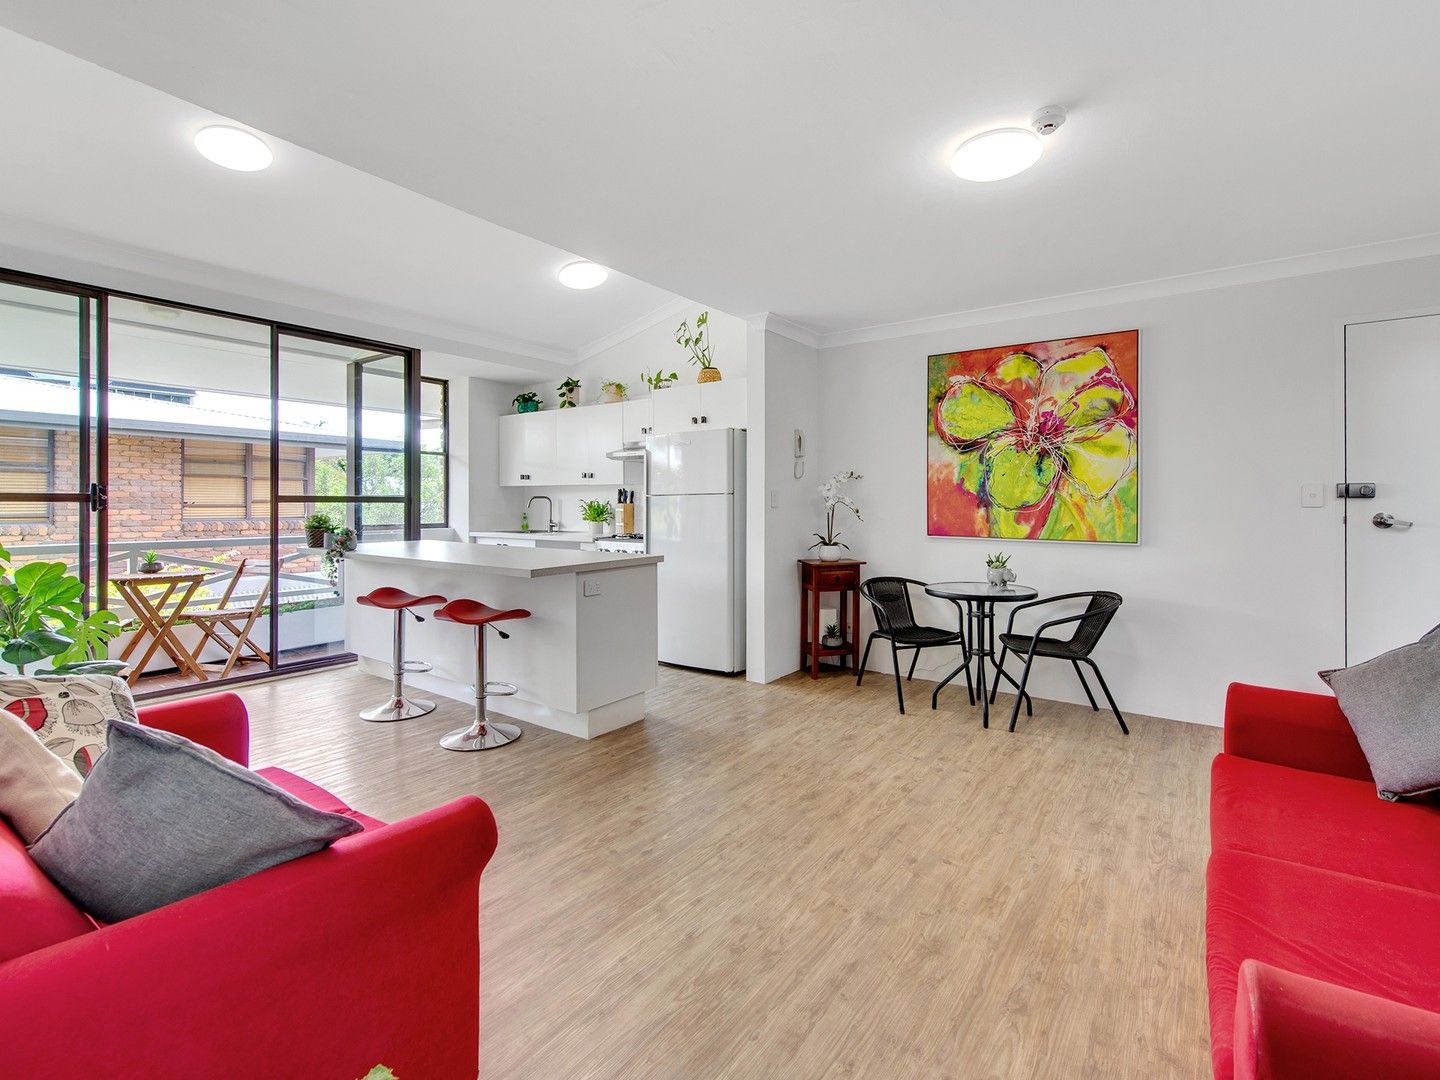 3 bedrooms Apartment / Unit / Flat in 28/37 Phillips Street SPRING HILL QLD, 4000